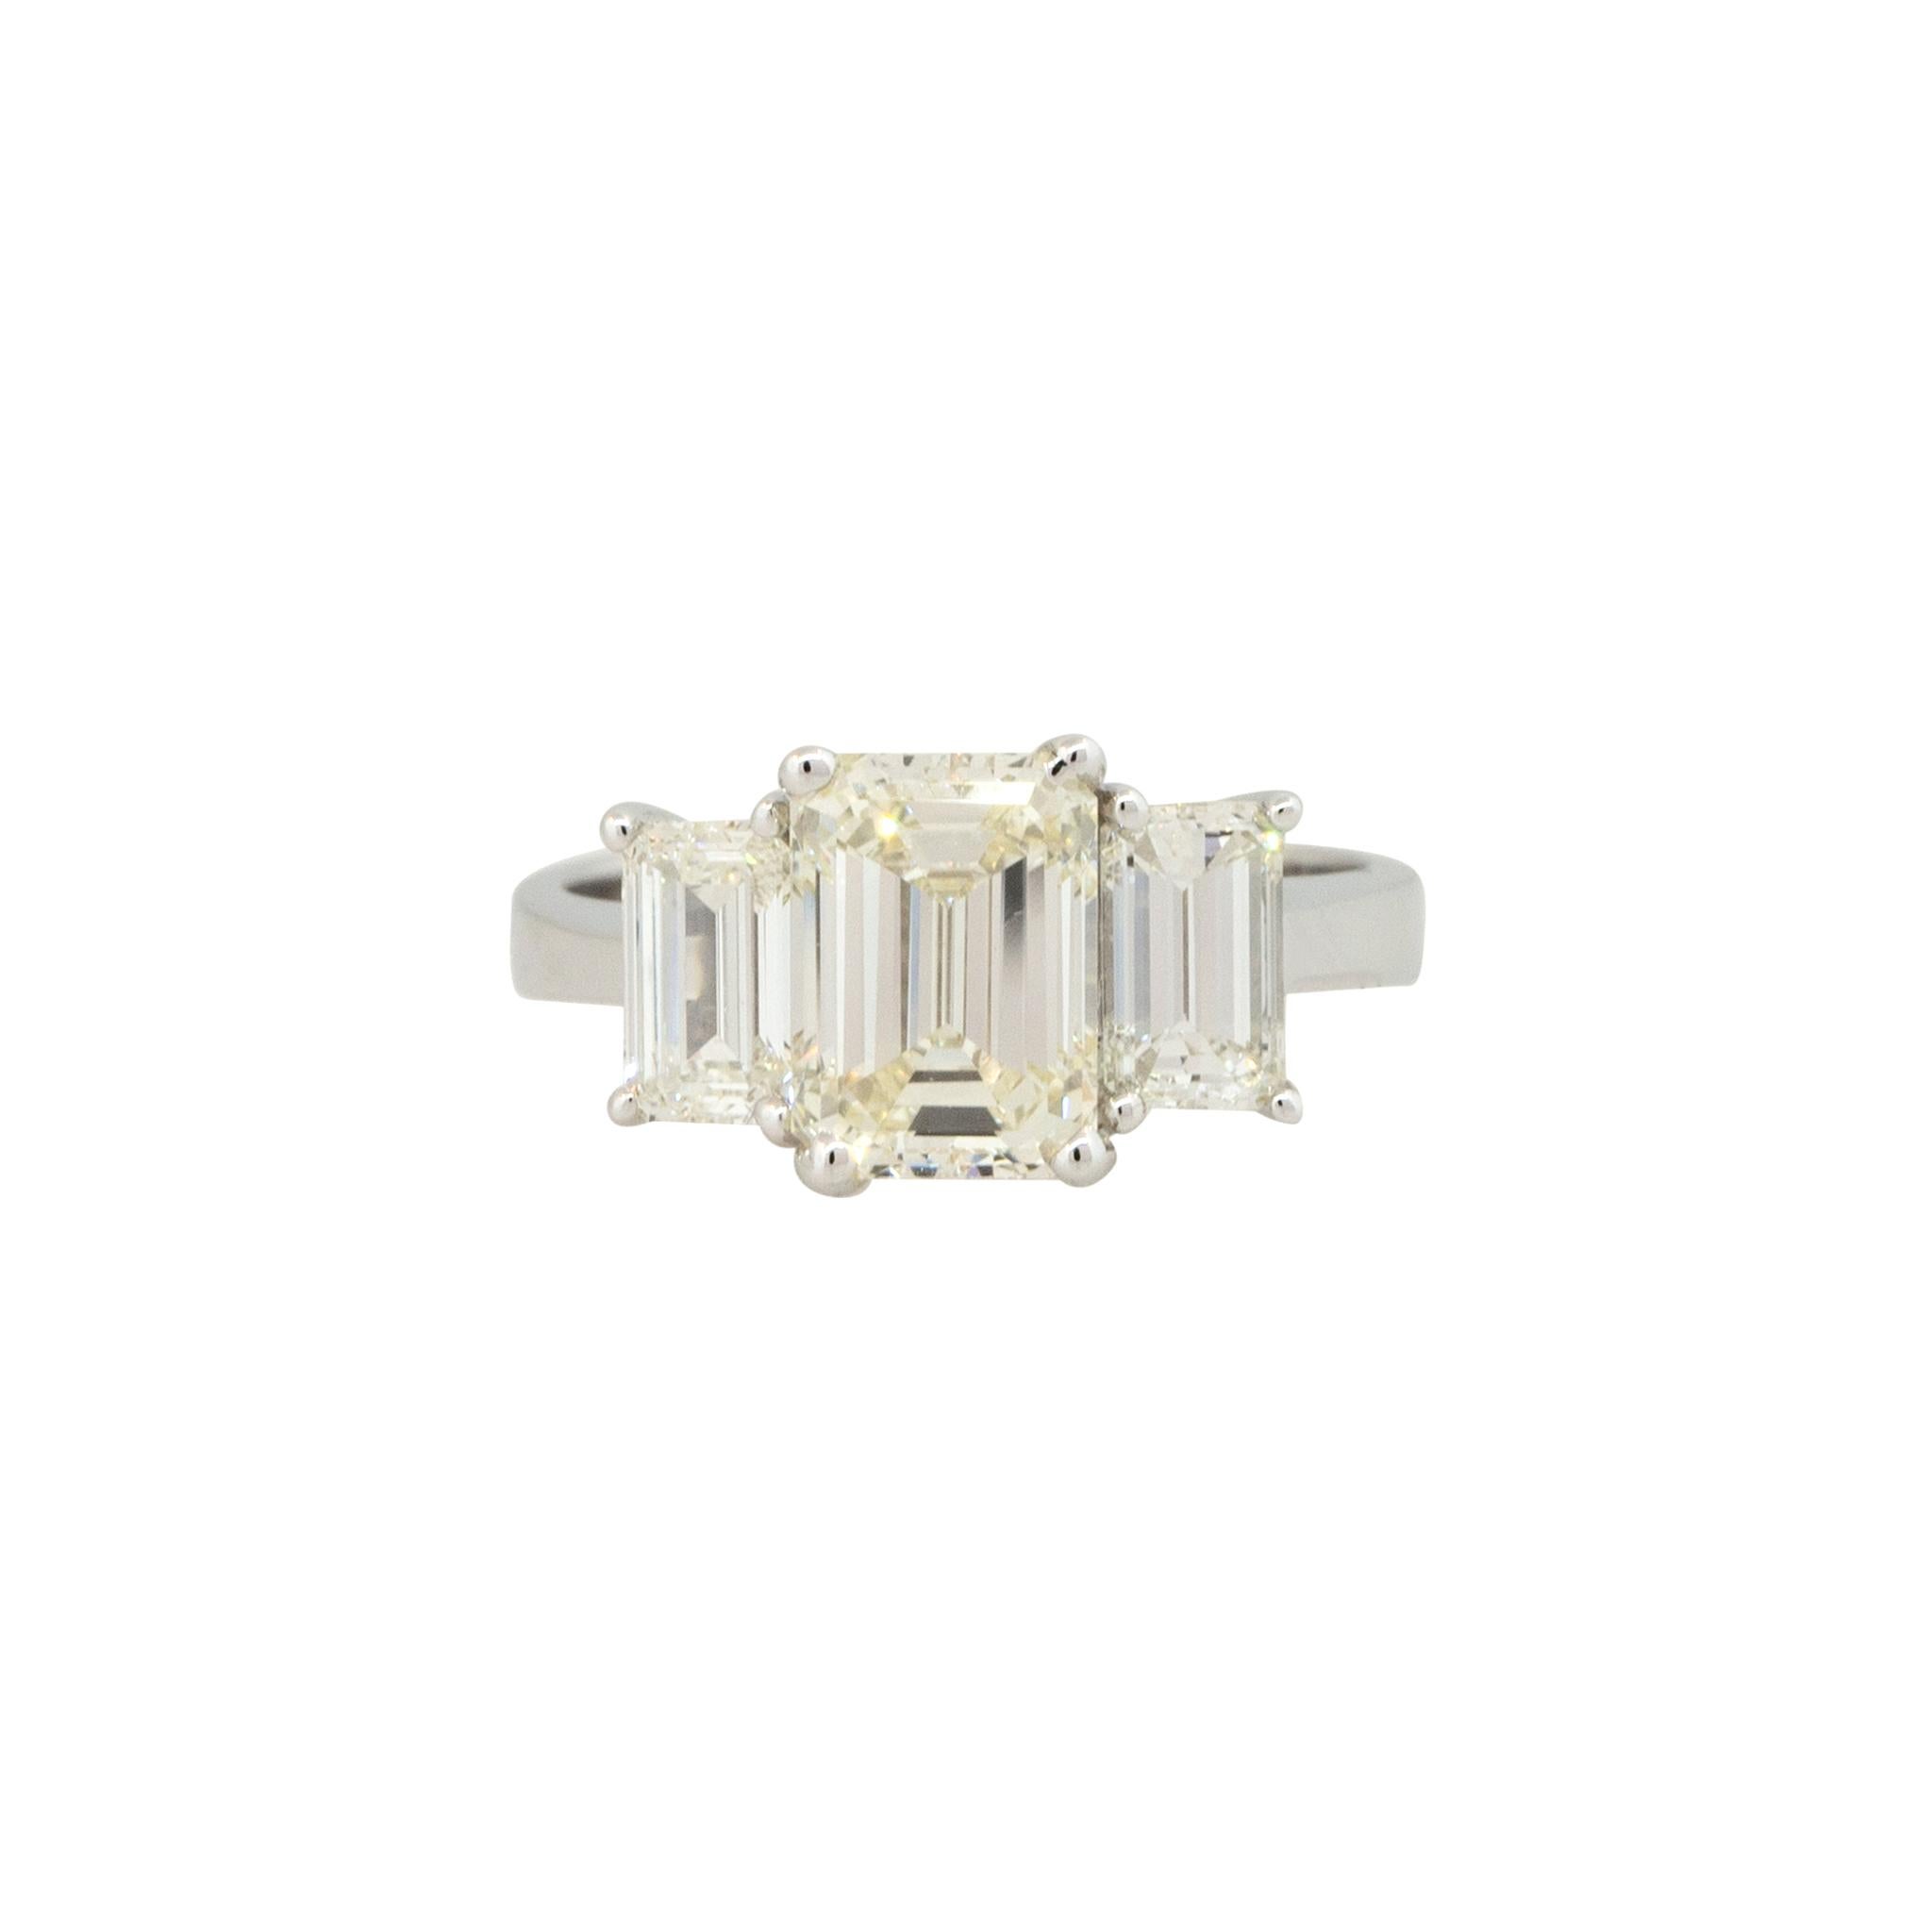 18k White Gold 3.21ctw 3 Stone Emerald Cut Diamond Engagement Ring

Raymond Lee Jewelers in Boca Raton -- South Florida’s destination for diamonds, fine jewelry, antique jewelry, estate pieces, and vintage jewels.

Style: Women's 3 Stone Emerald